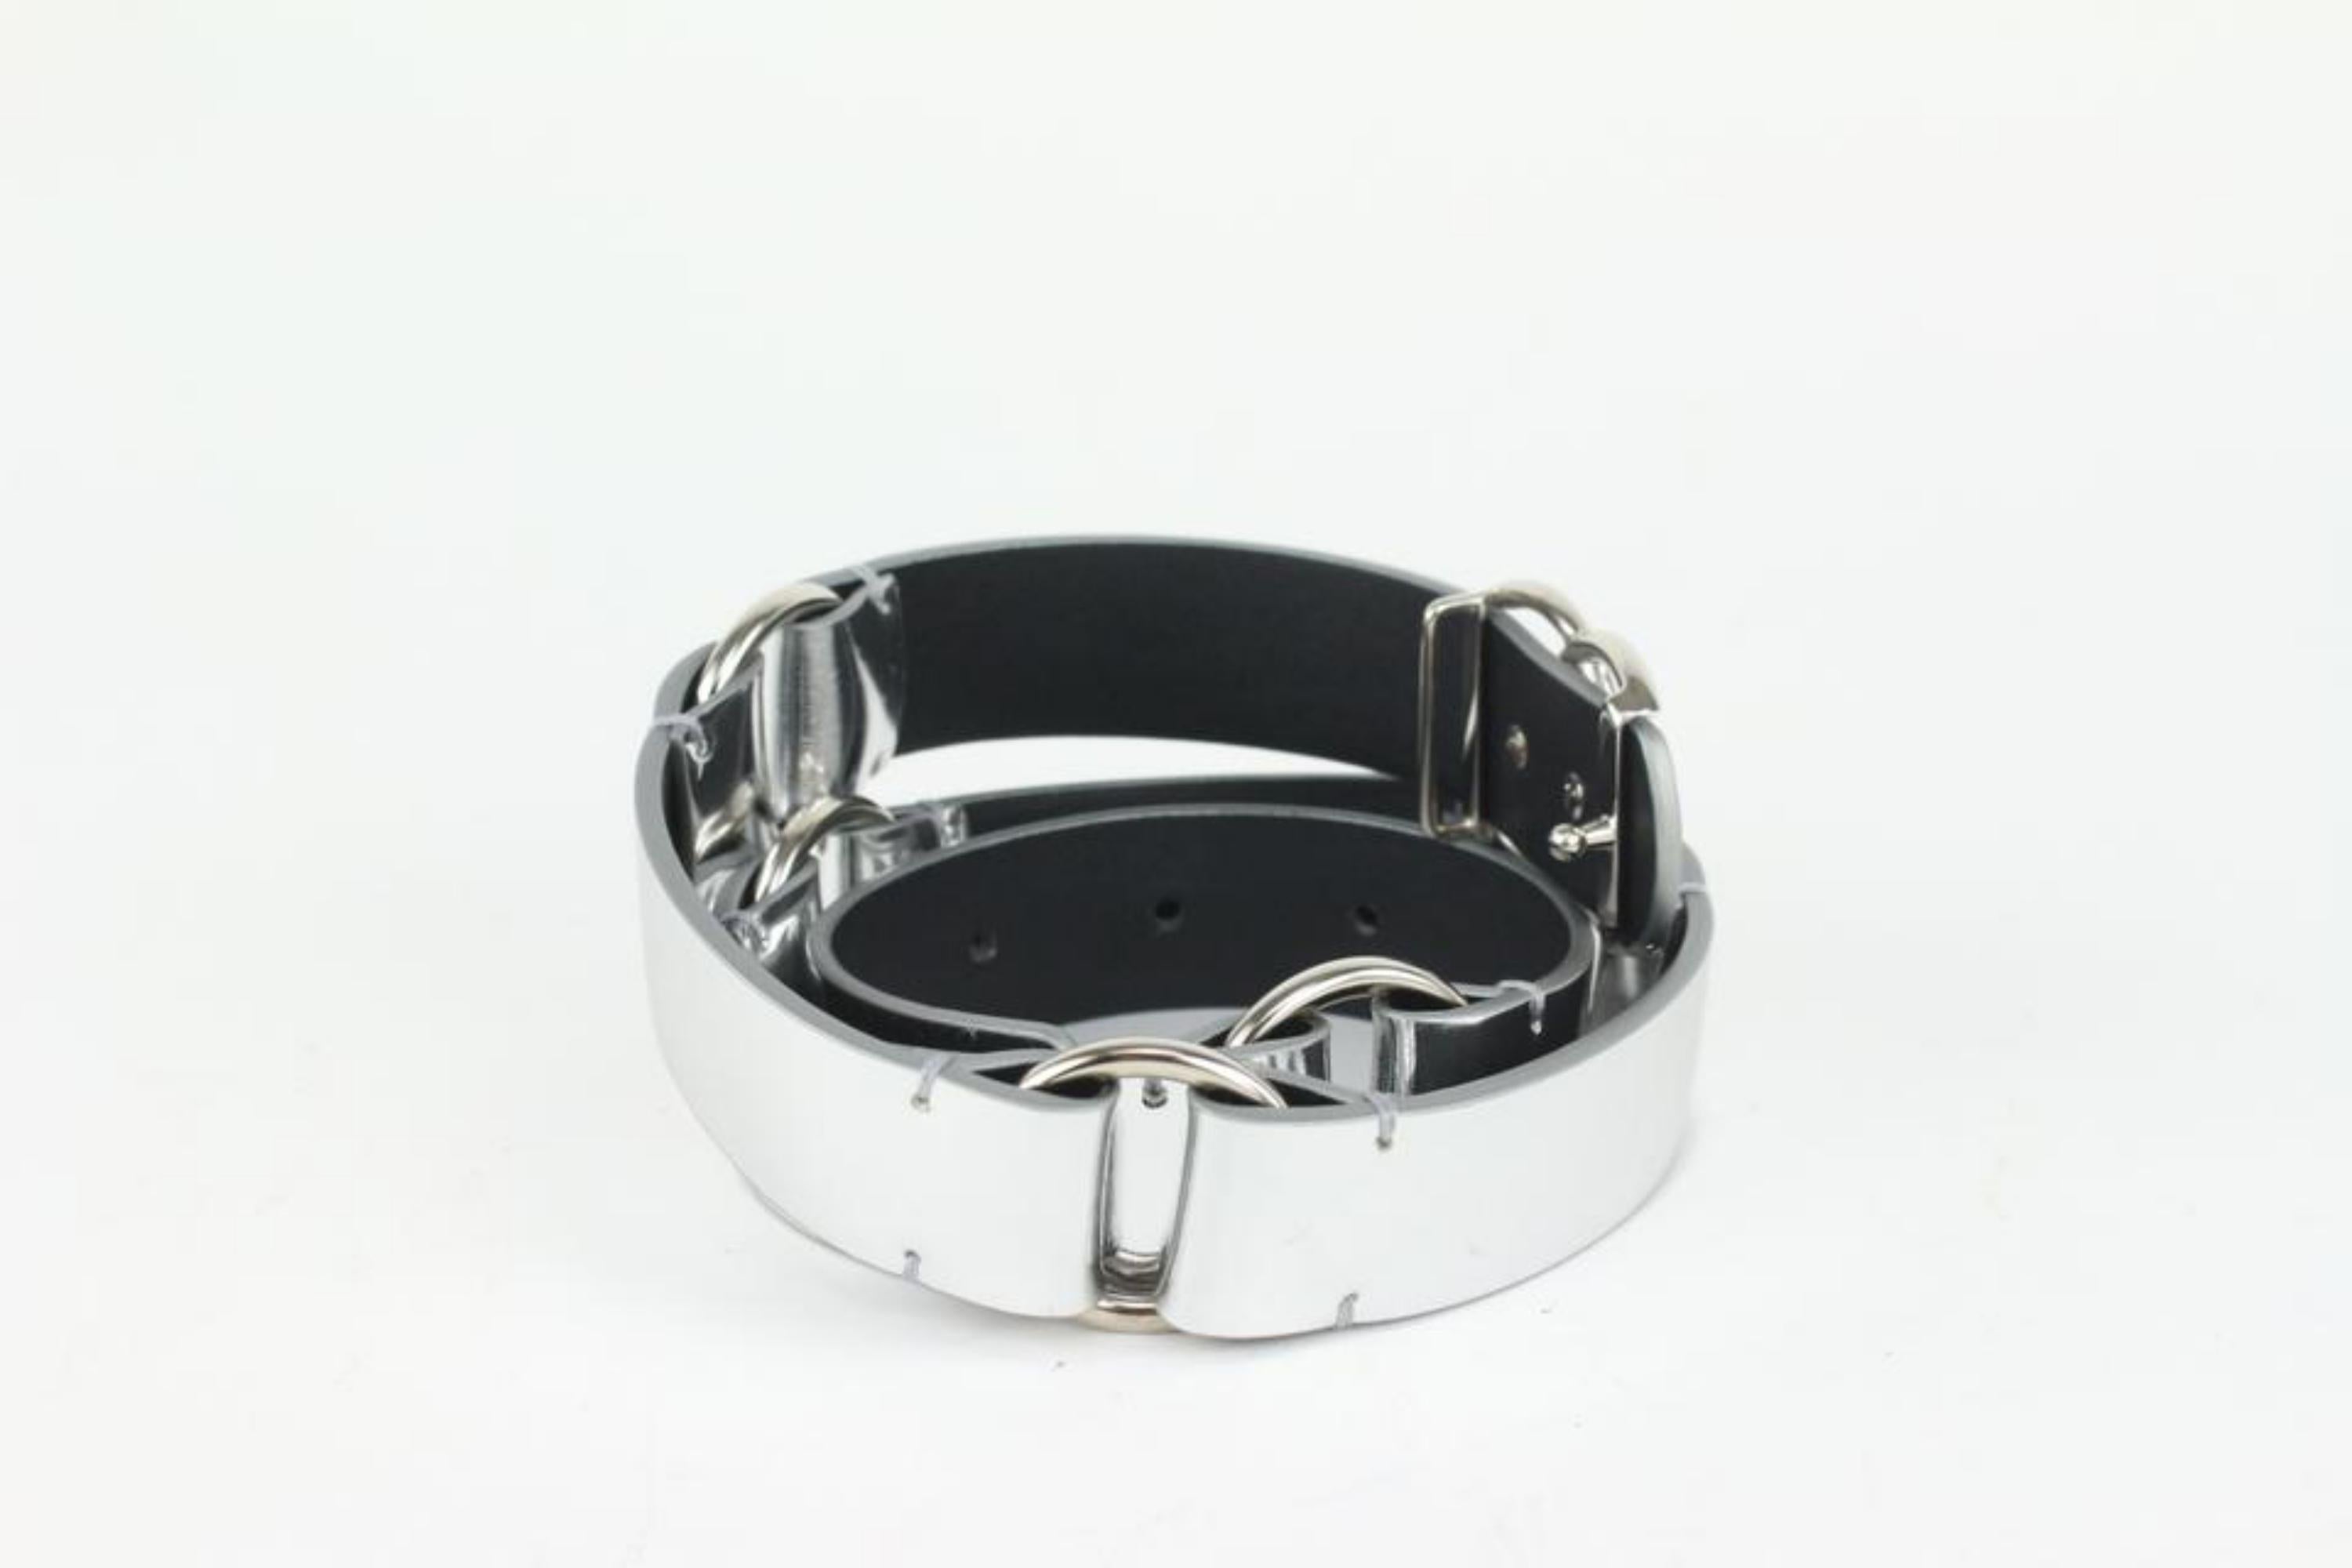 chanel B16S 70/28 Silver Leather CC Logo Belt 106c25 For Sale 5